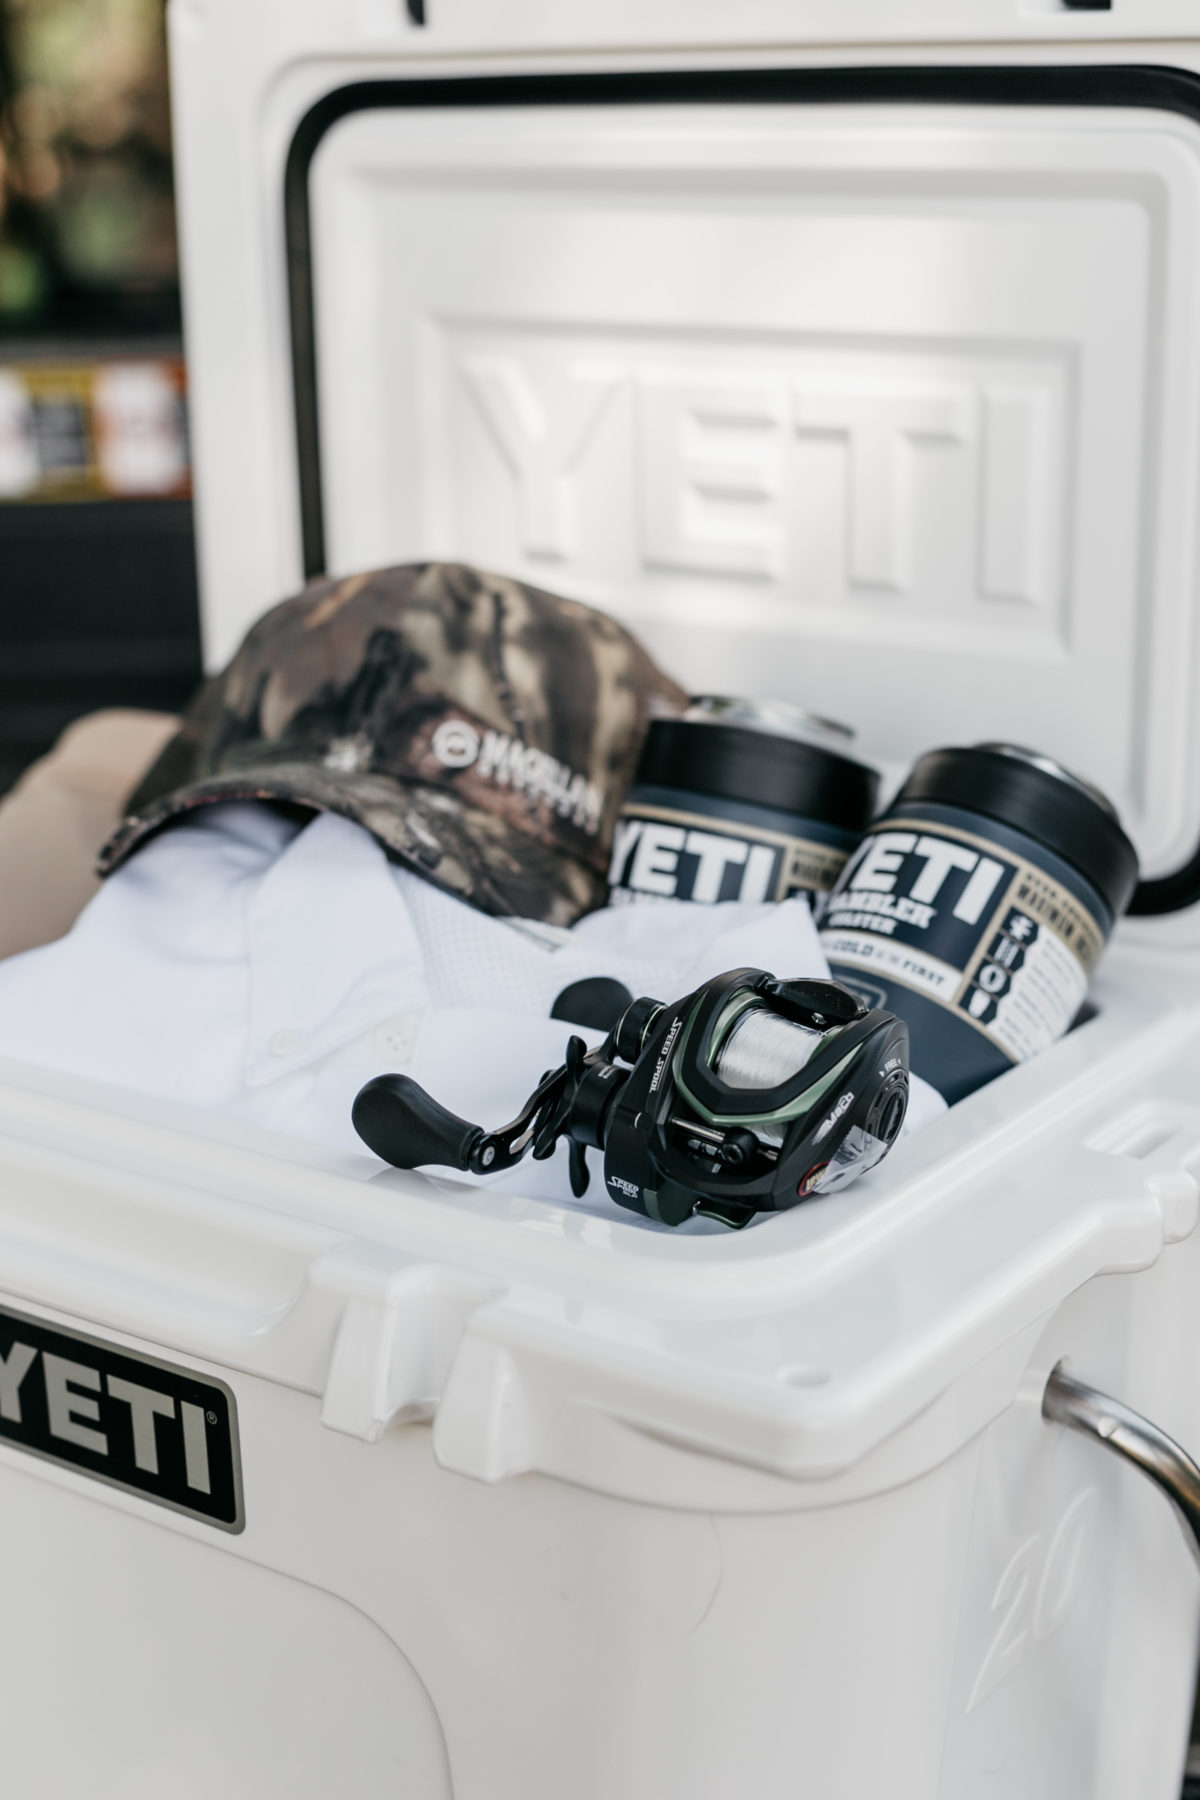 Yeti cooler and can holders